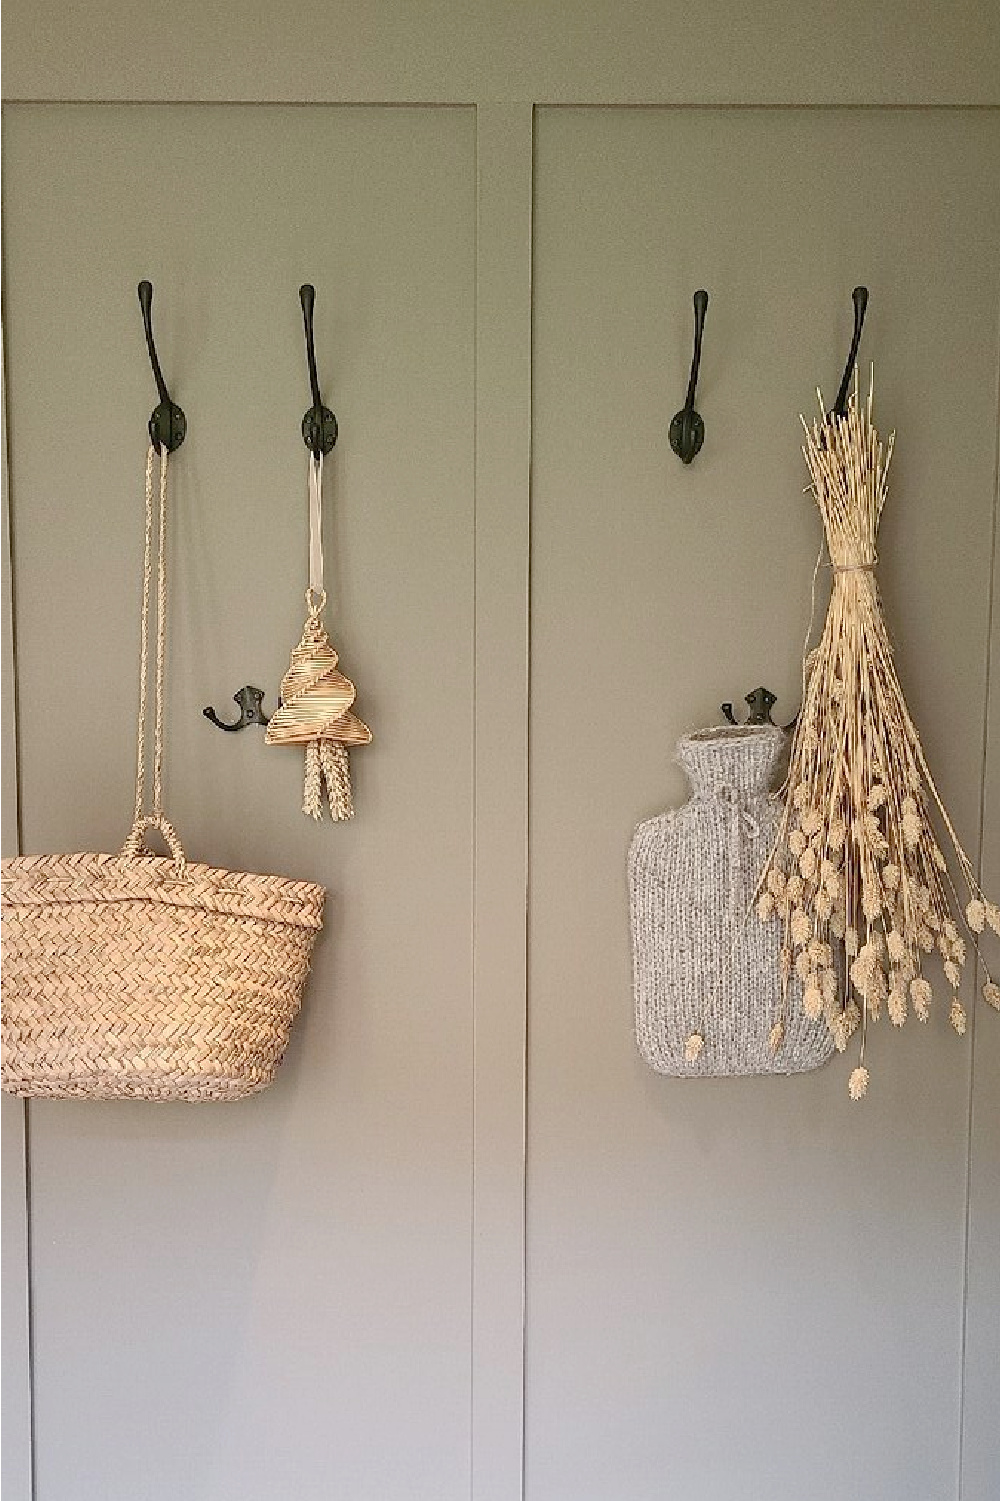 English country style board and batten moulding and hooks with natural woven basket, corn dolly, and hot water bottle at Heckfield Place in Hampshire, England.